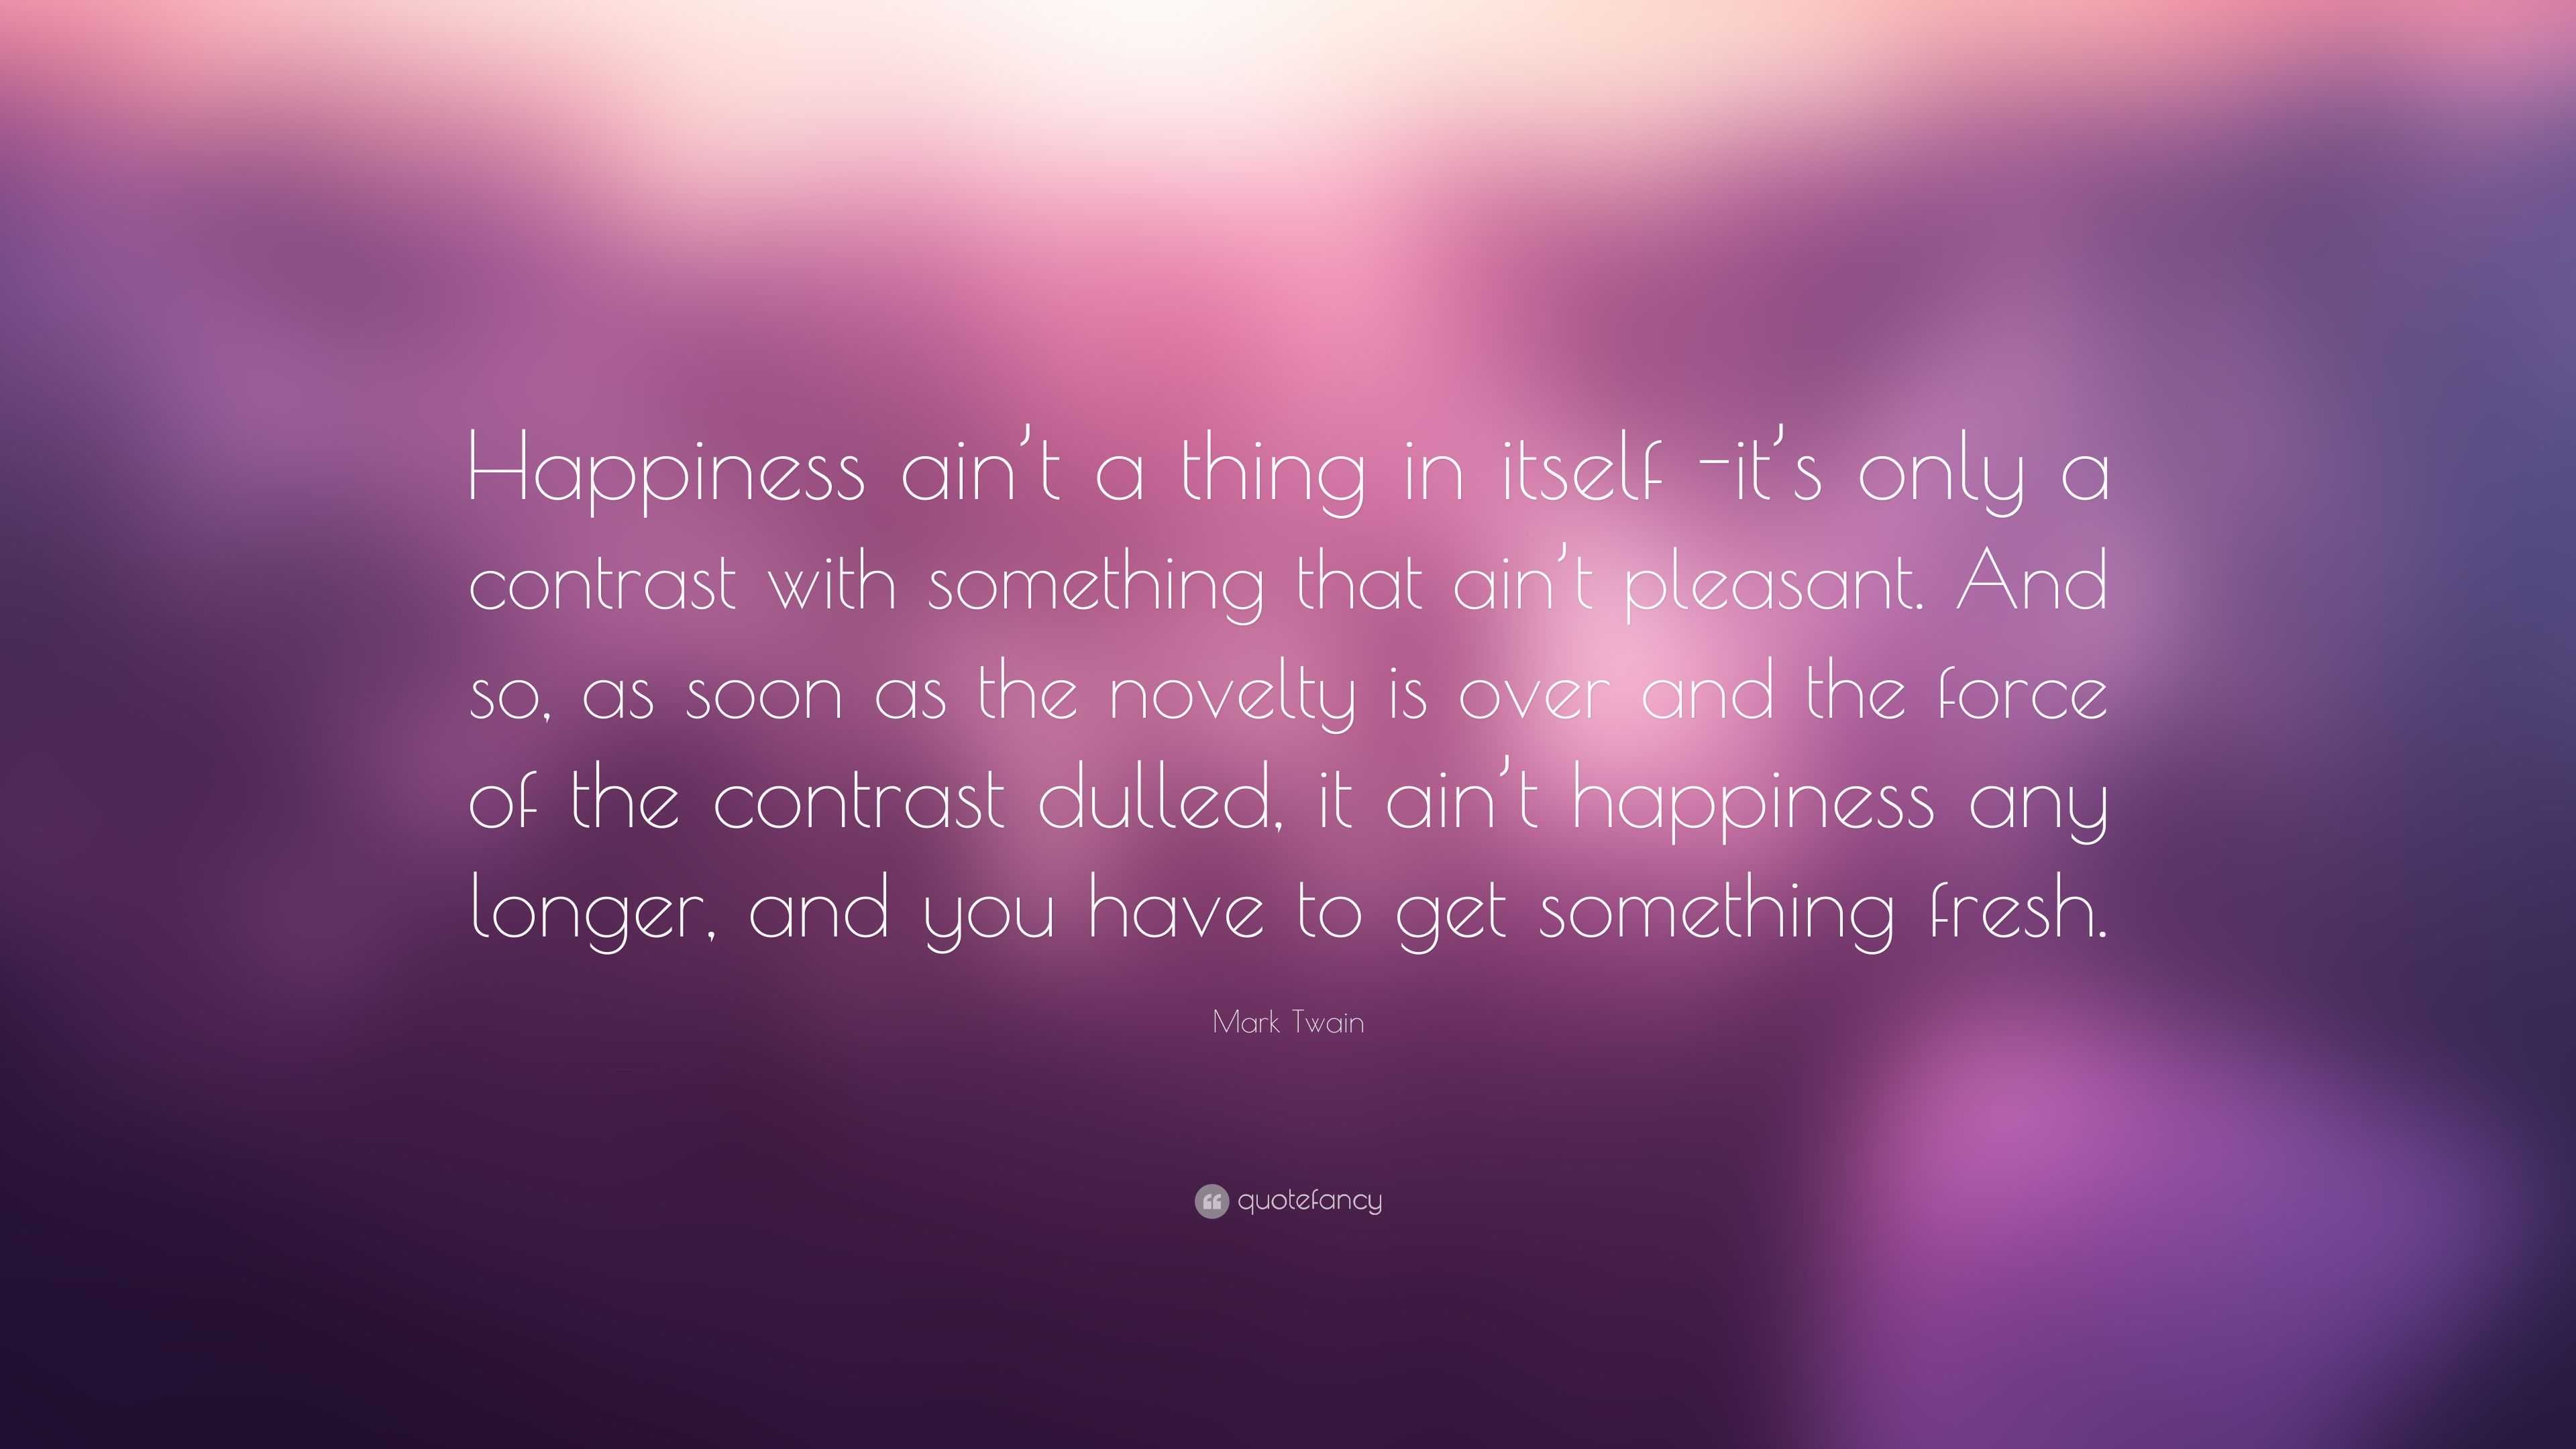 Mark Twain Quote: “Happiness ain’t a thing in itself -it’s only a ...